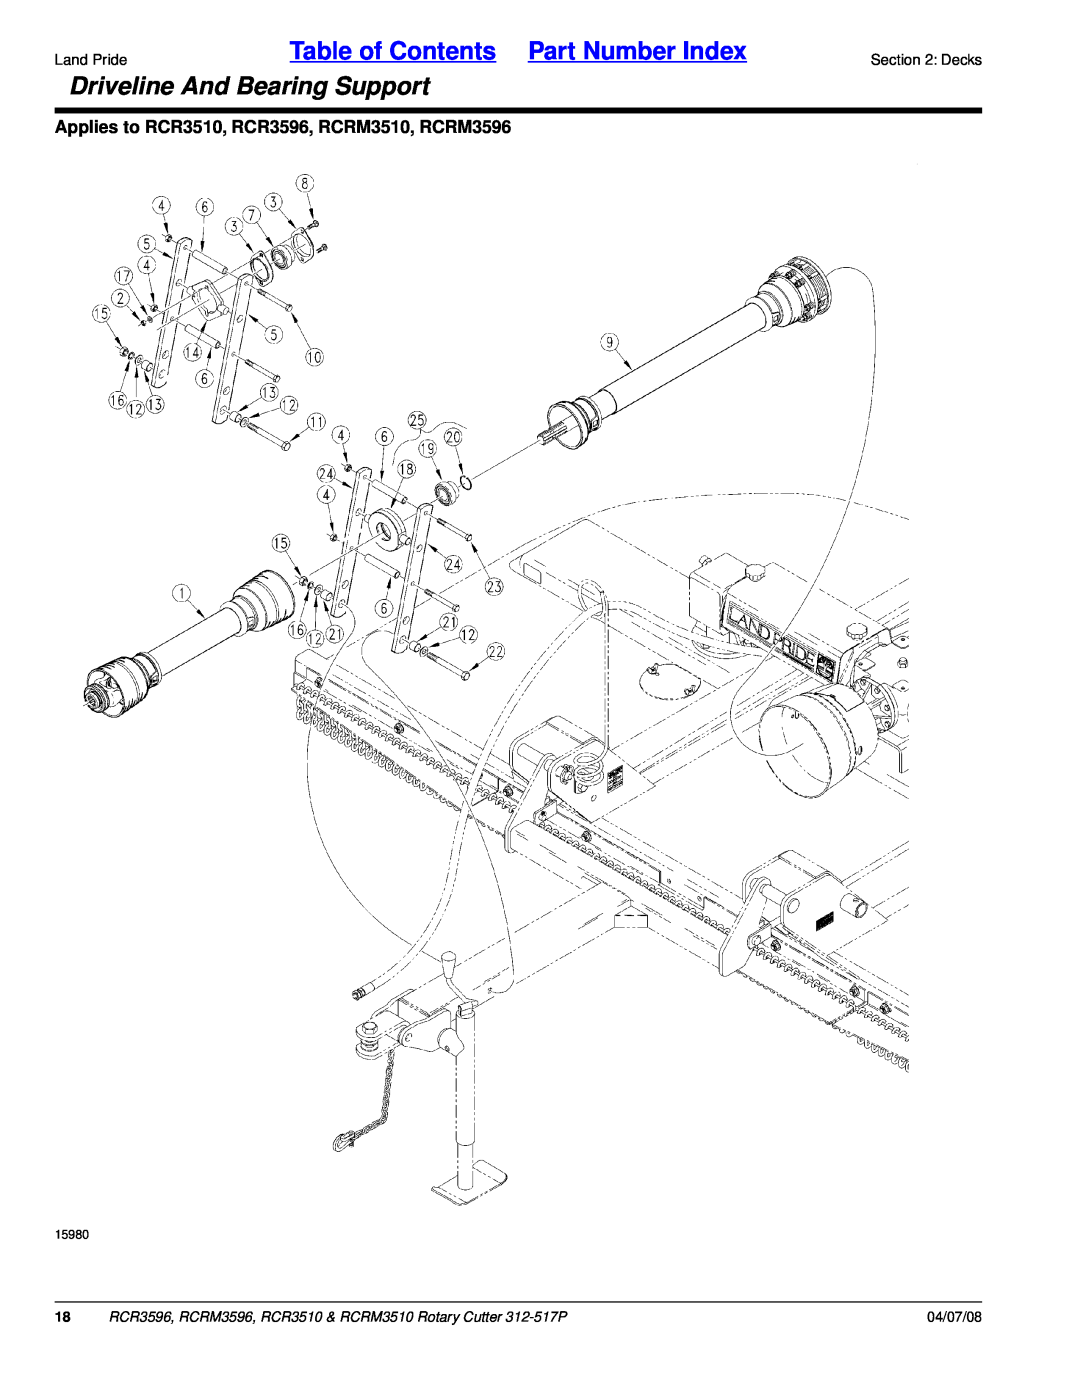 Land Pride RCRM3596, RCR3510, RCRM3510 Driveline And Bearing Support, Table of Contents Part Number Index, 04/07/08, 15980 